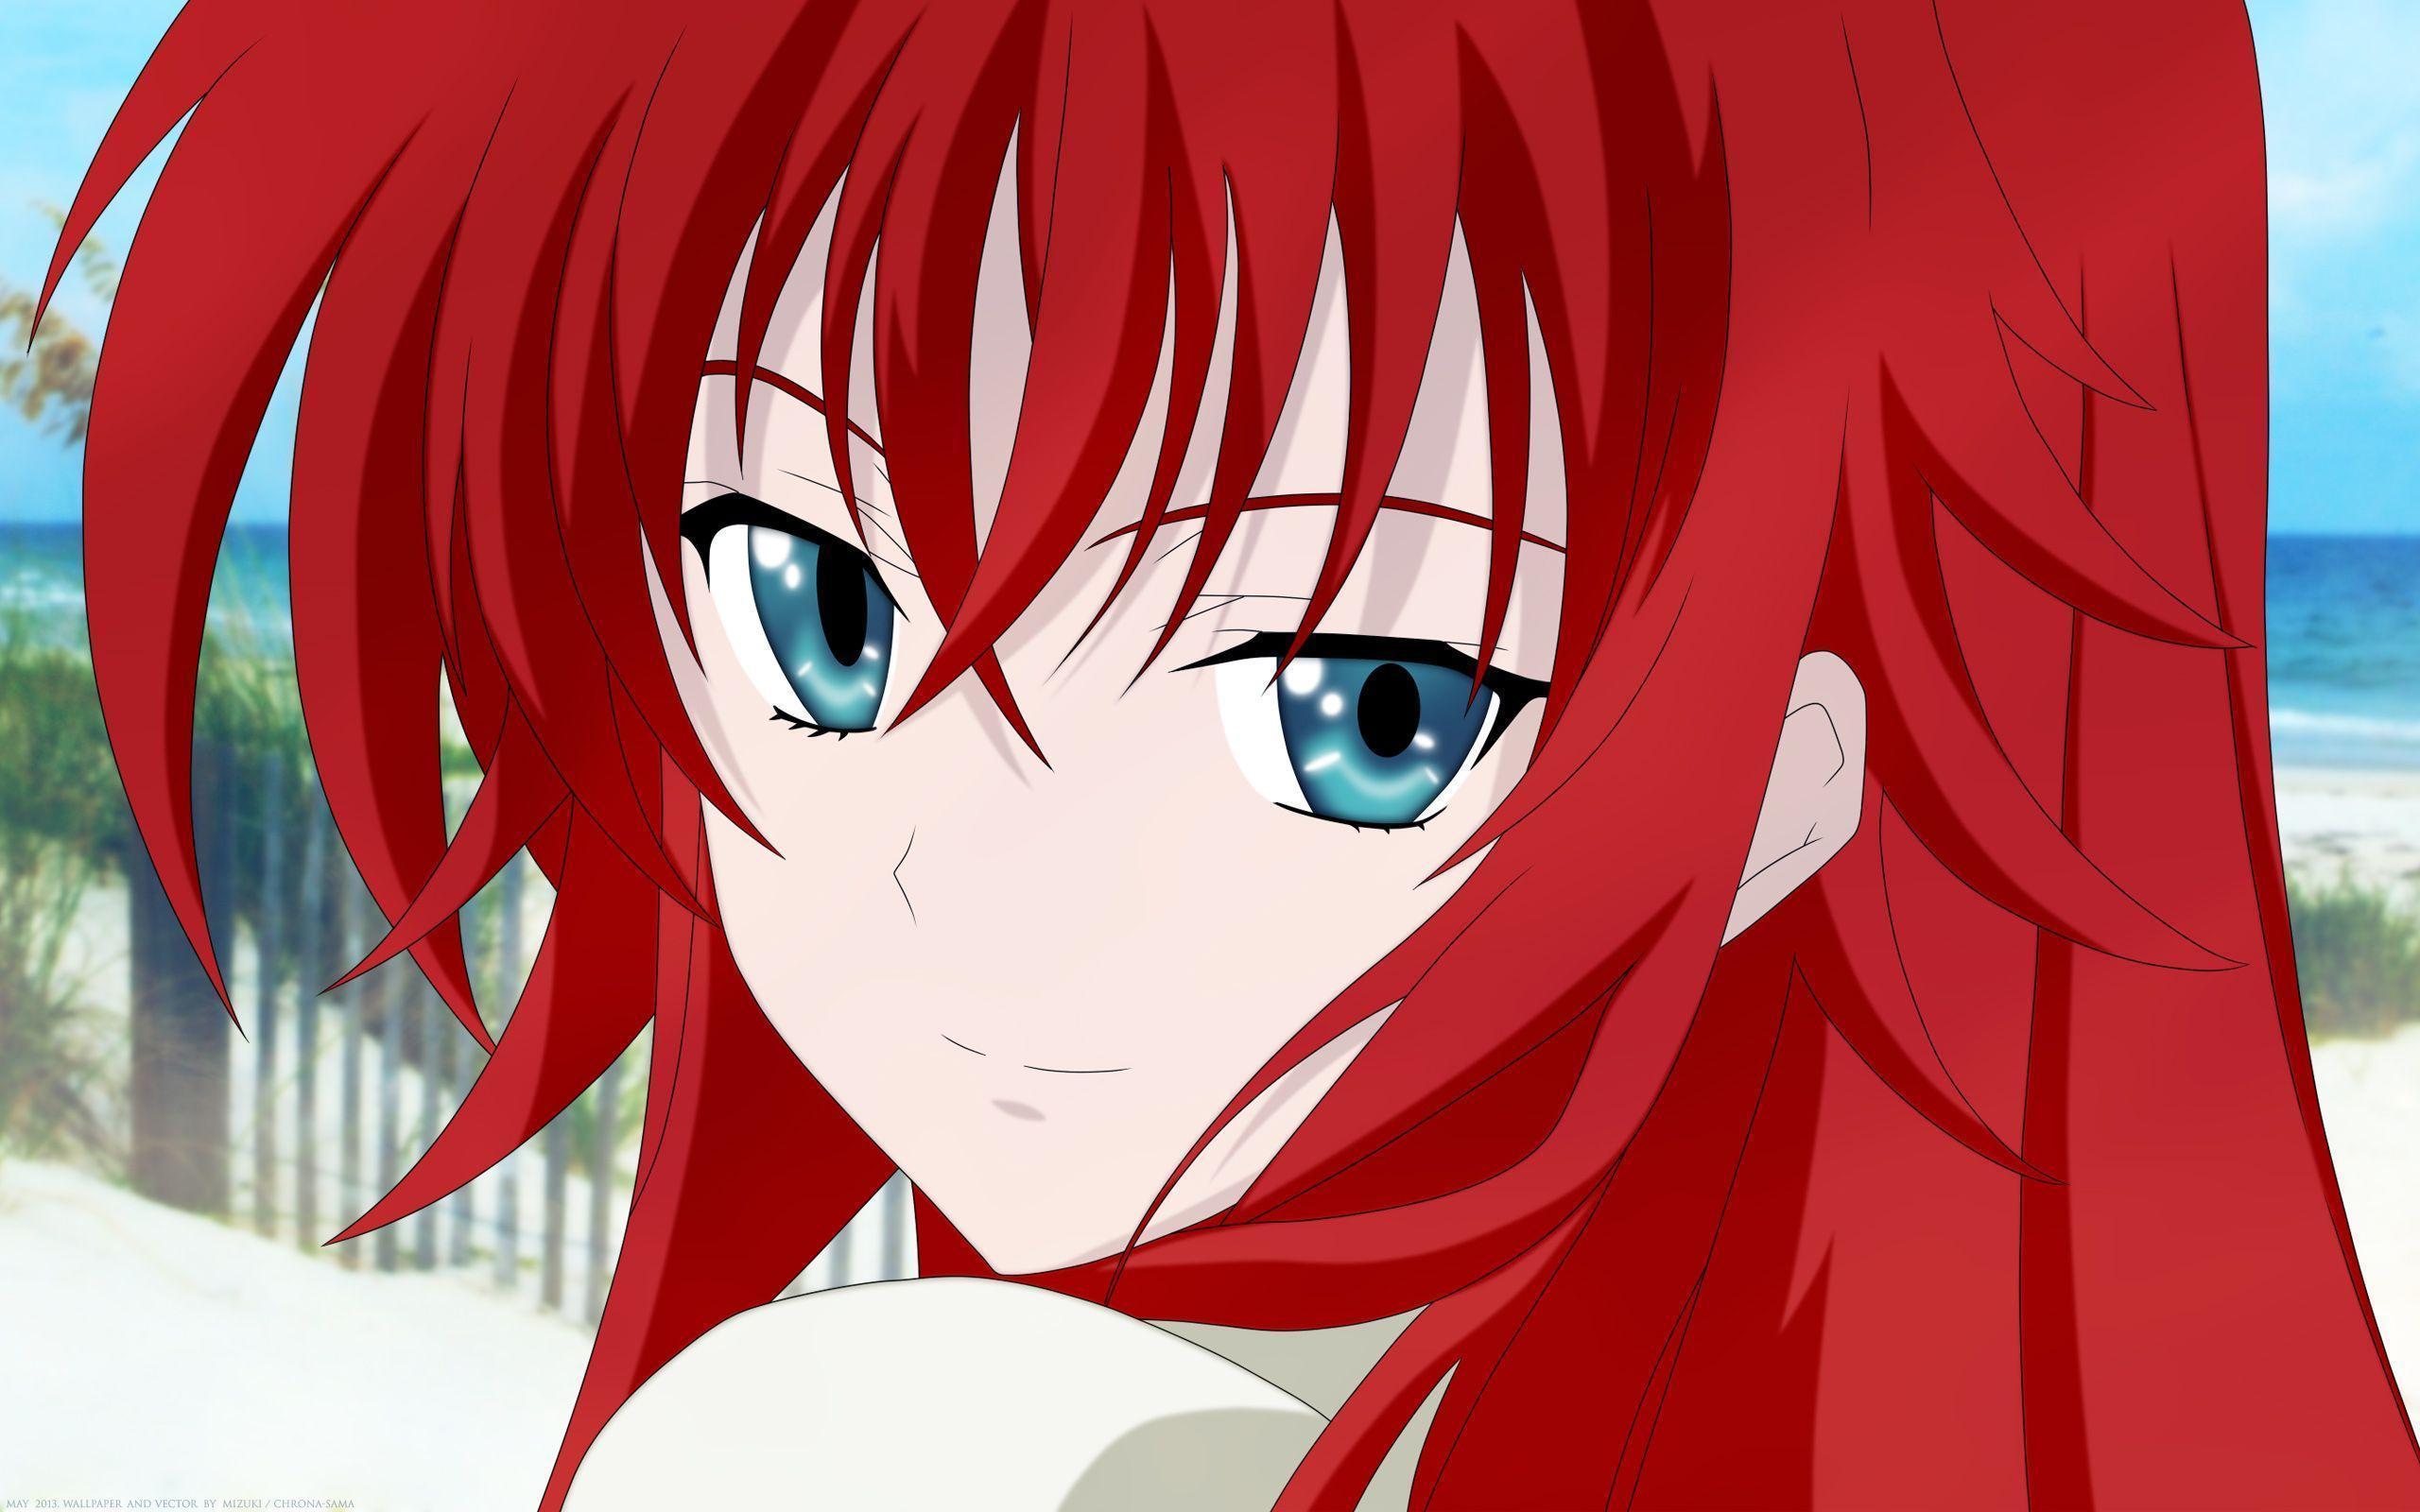 8. Rias Gremory from High School DxD - wide 3